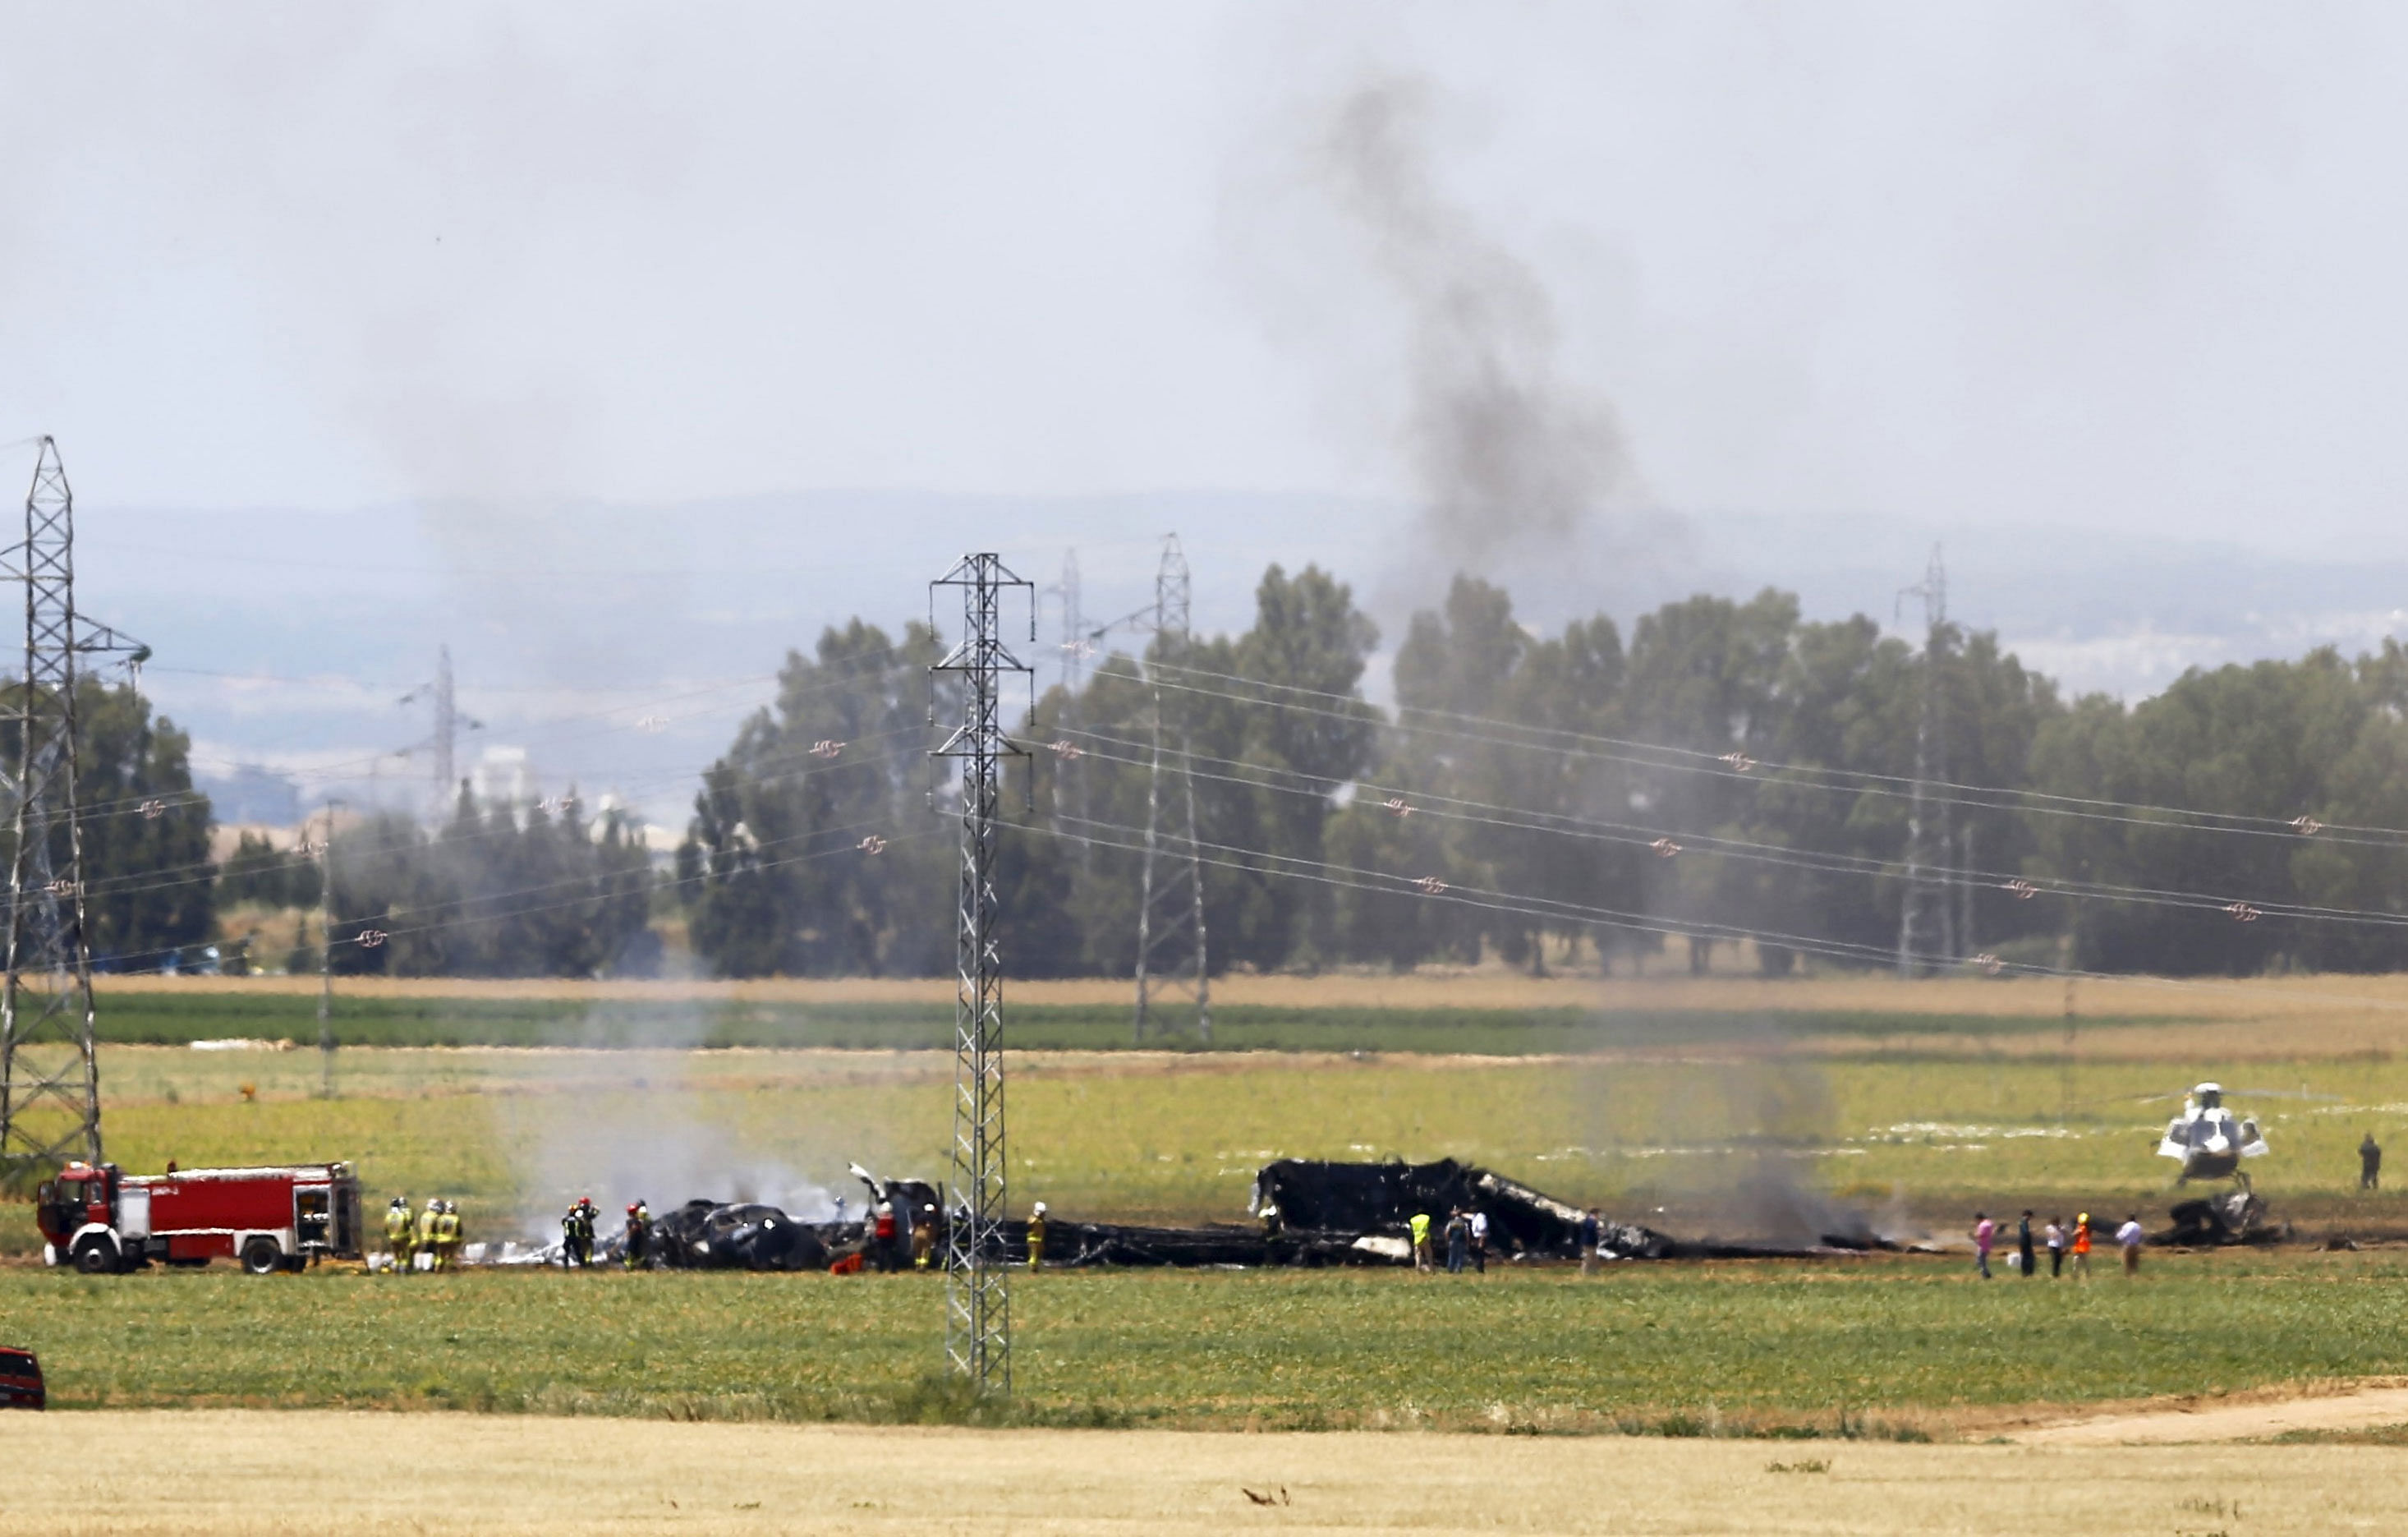 The remains of Airbus A400M are seen after crashing in a field near the Andalusian capital of Seville May 9, 2015.  Reuters Photo.